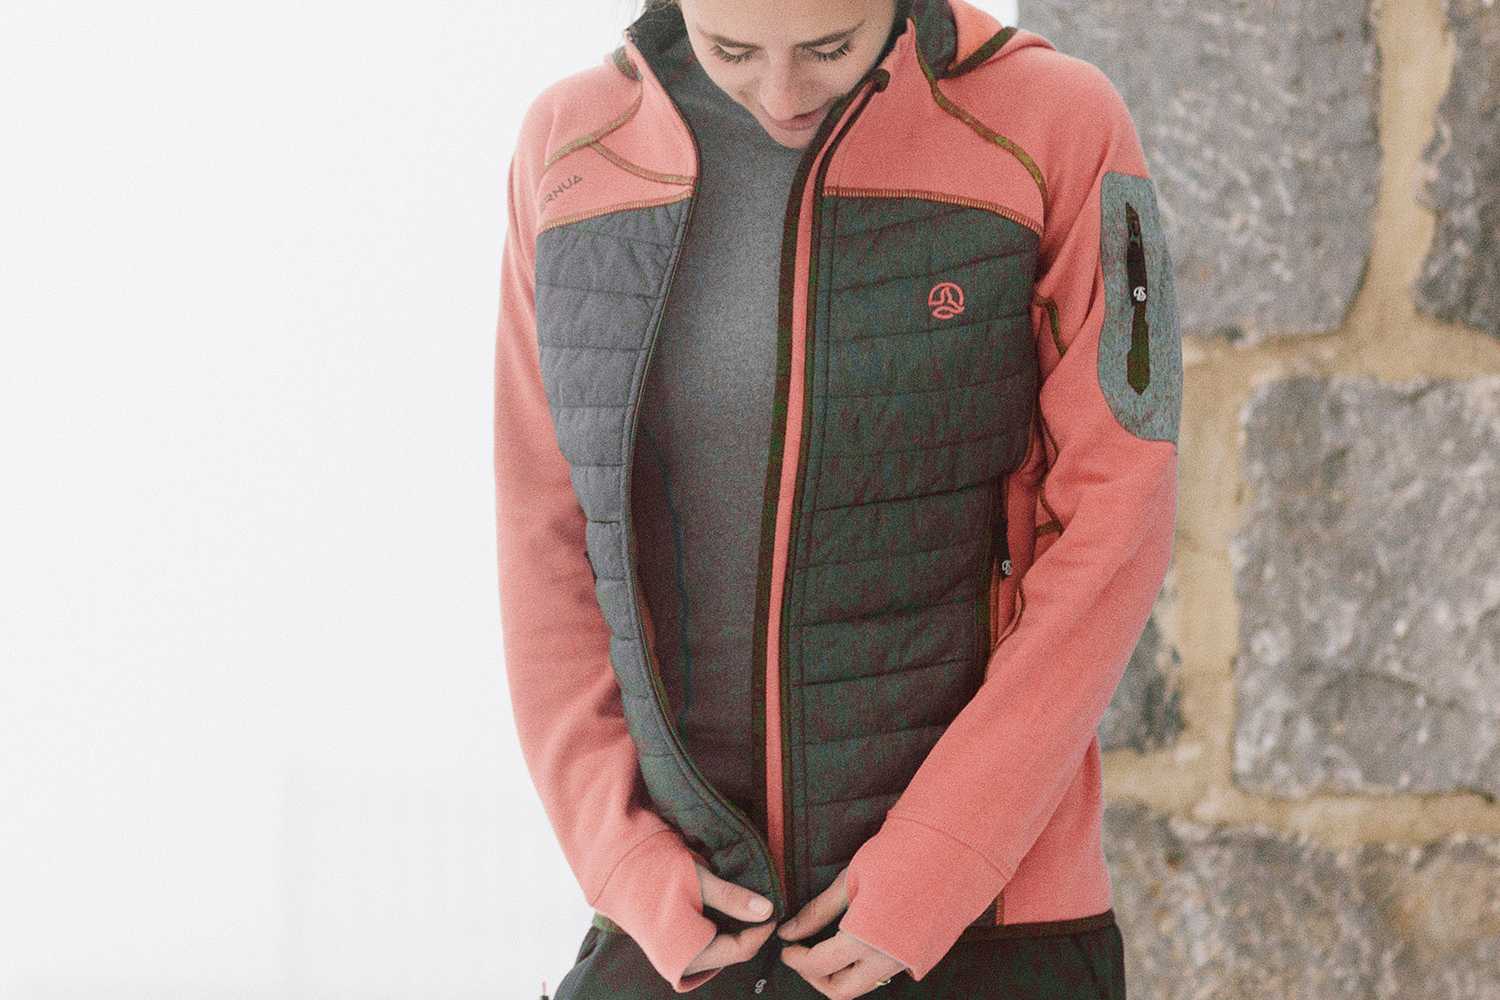 Layering clothing for mountain adventure travel